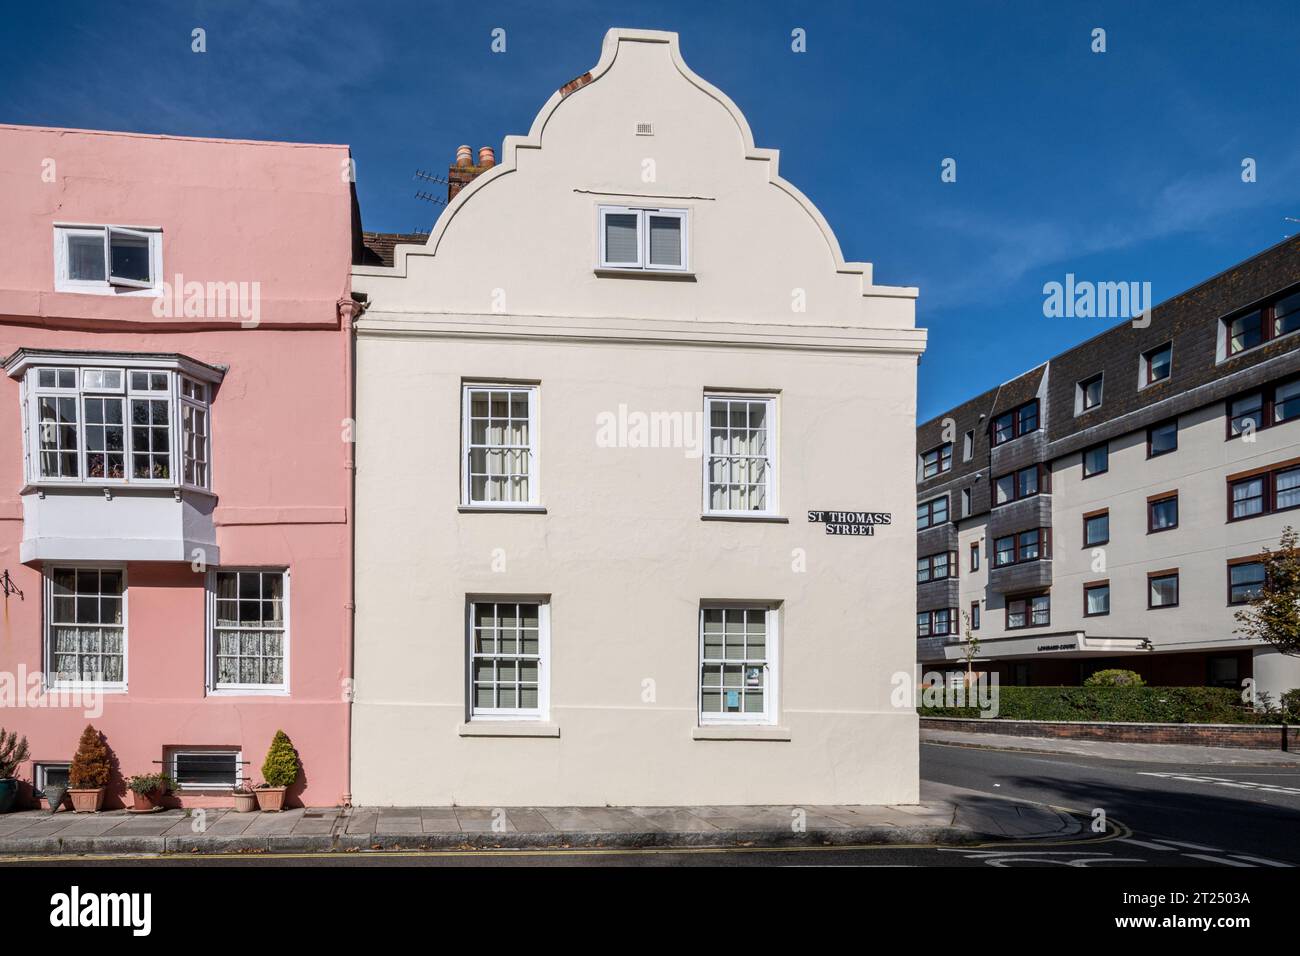 Picturesque houses properties buildings in St Thomas's Street, Old Portsmouth, Hampshire, England, UK Stock Photo